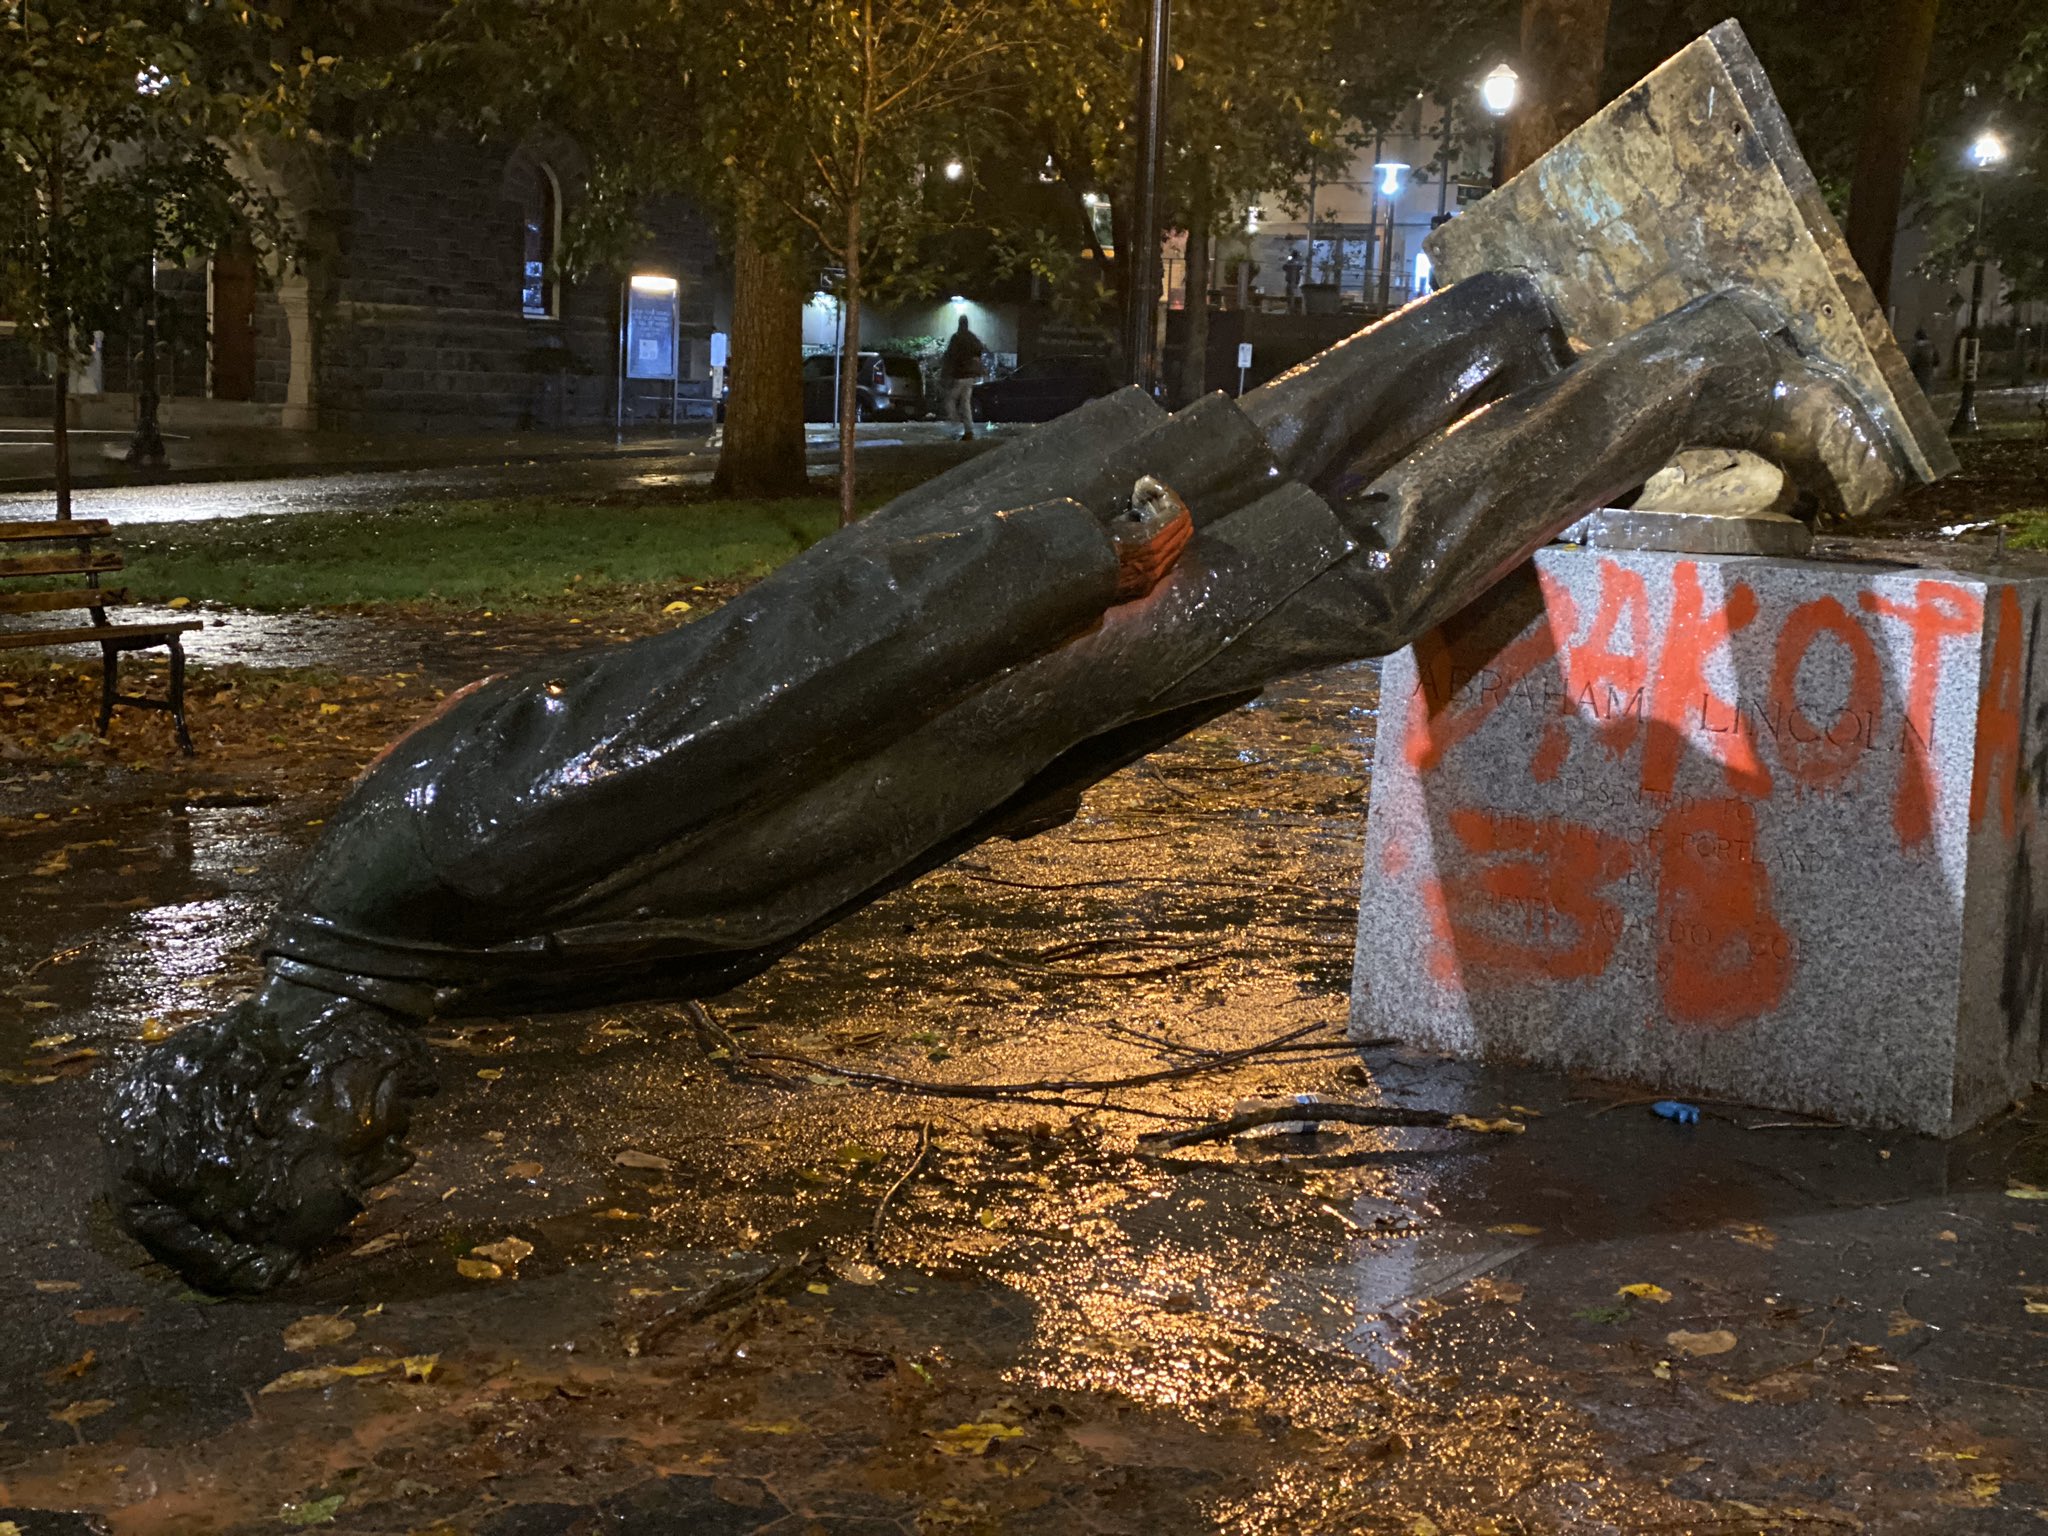 Statue of Abraham Lincoln in Portland, Oregon, toppled during the Indigenous Peoples Day of Rage on October 11, 2020. George Fite Waters, <em>Abraham Lincoln</em>, 1927, bronze, 10 feet high (photo © Sergio Olmos)